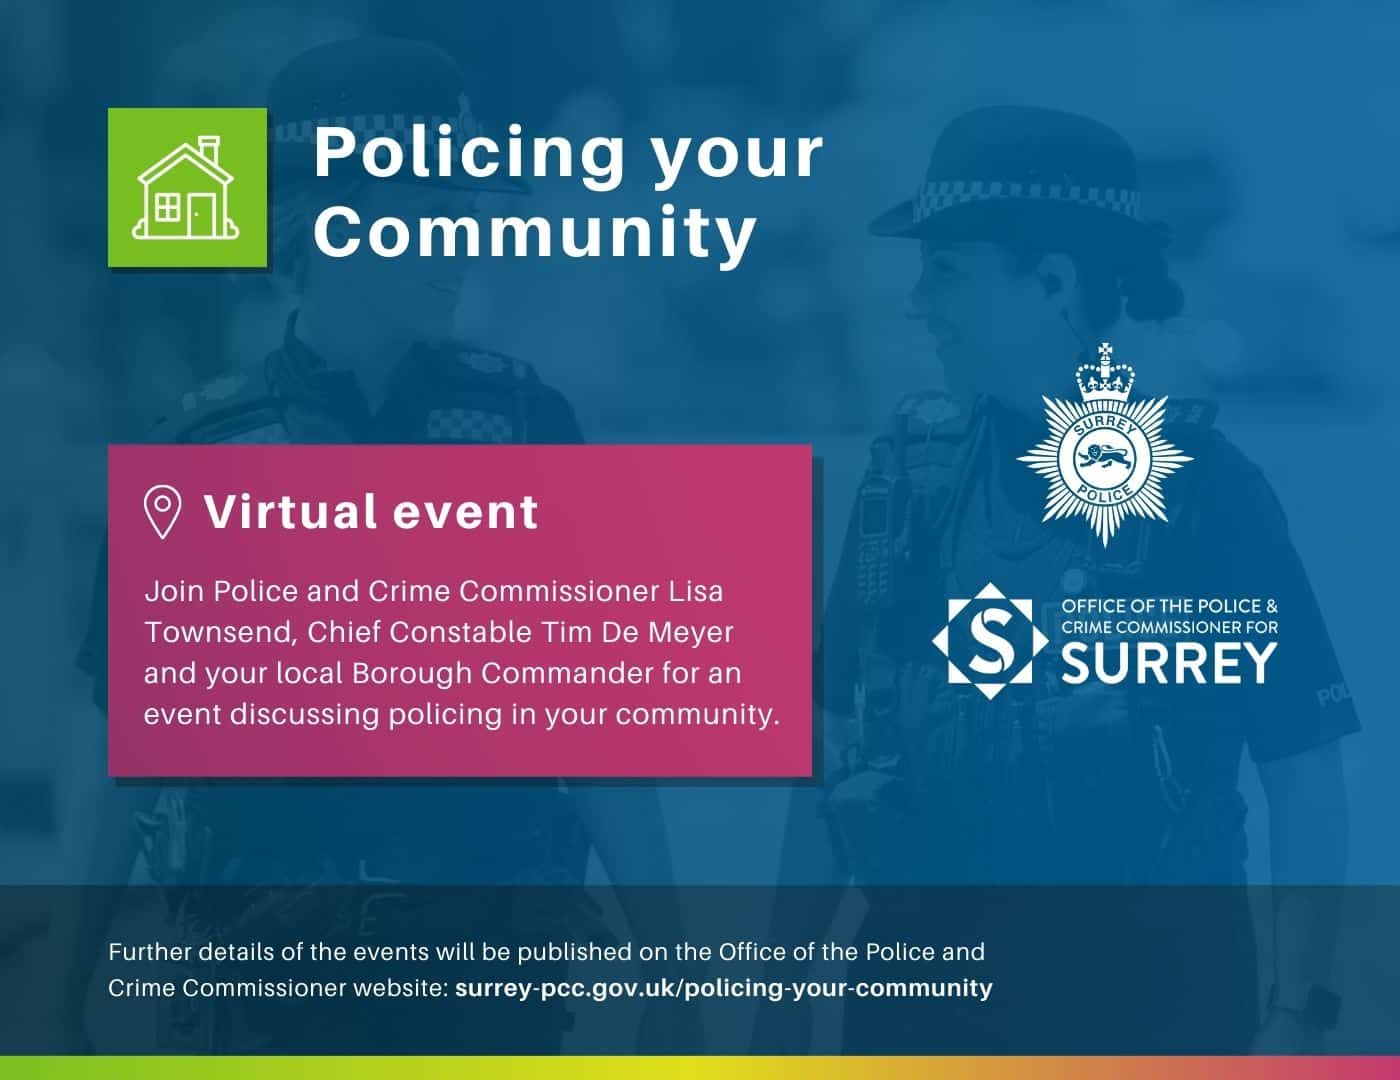 deep blue banner for 'Policing your Community' events with Office of the Police and Crime Commissioner and Surrey Police logos